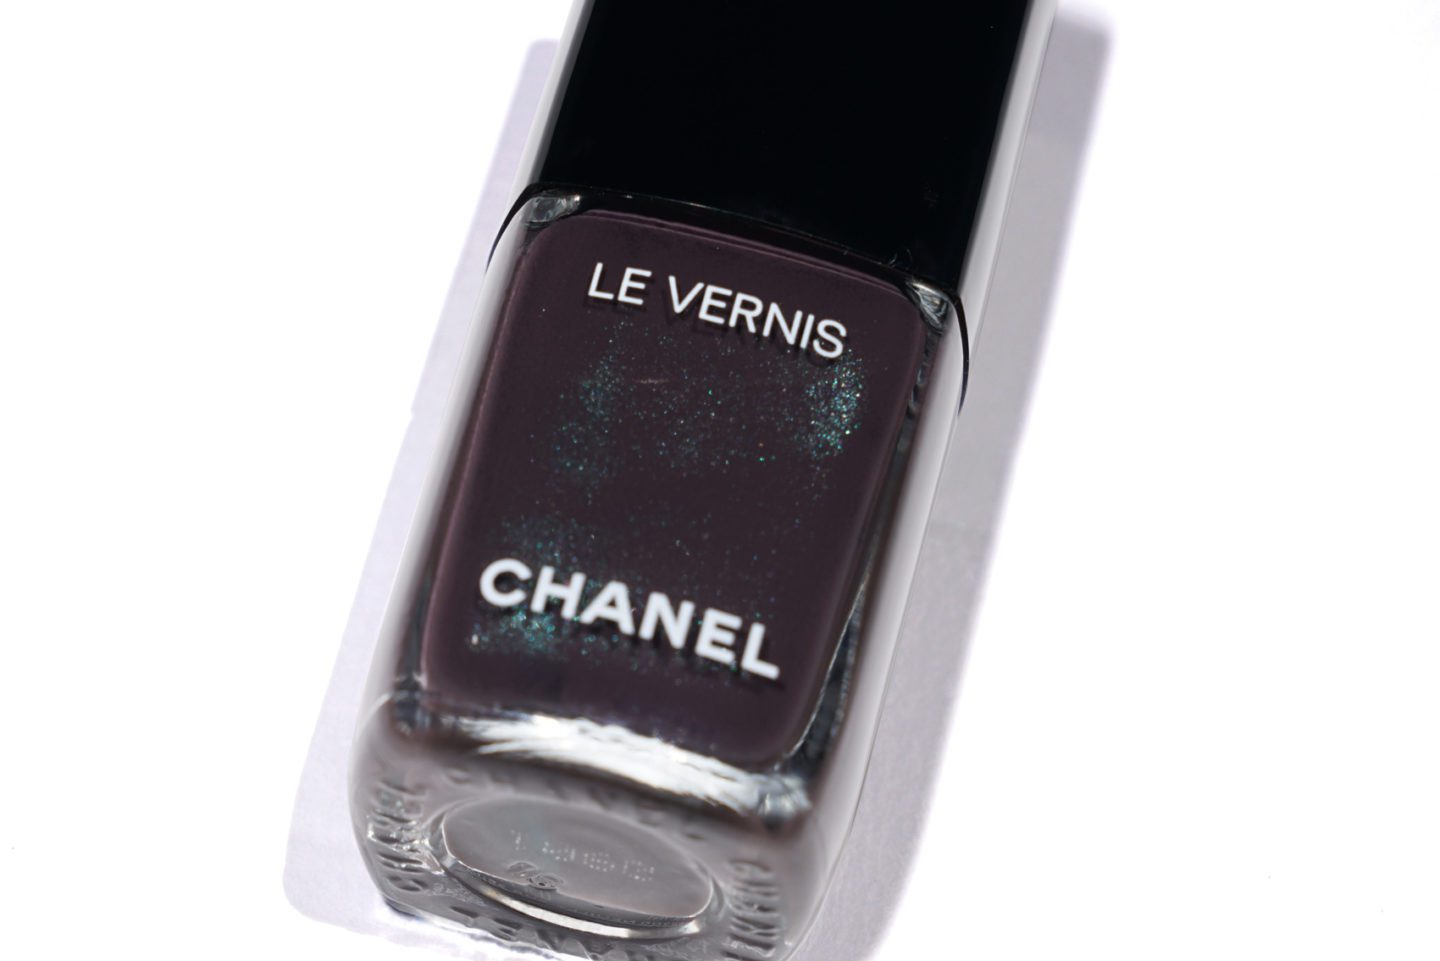 Chanel Le Vernis Androgyne | The Beauty Look Book